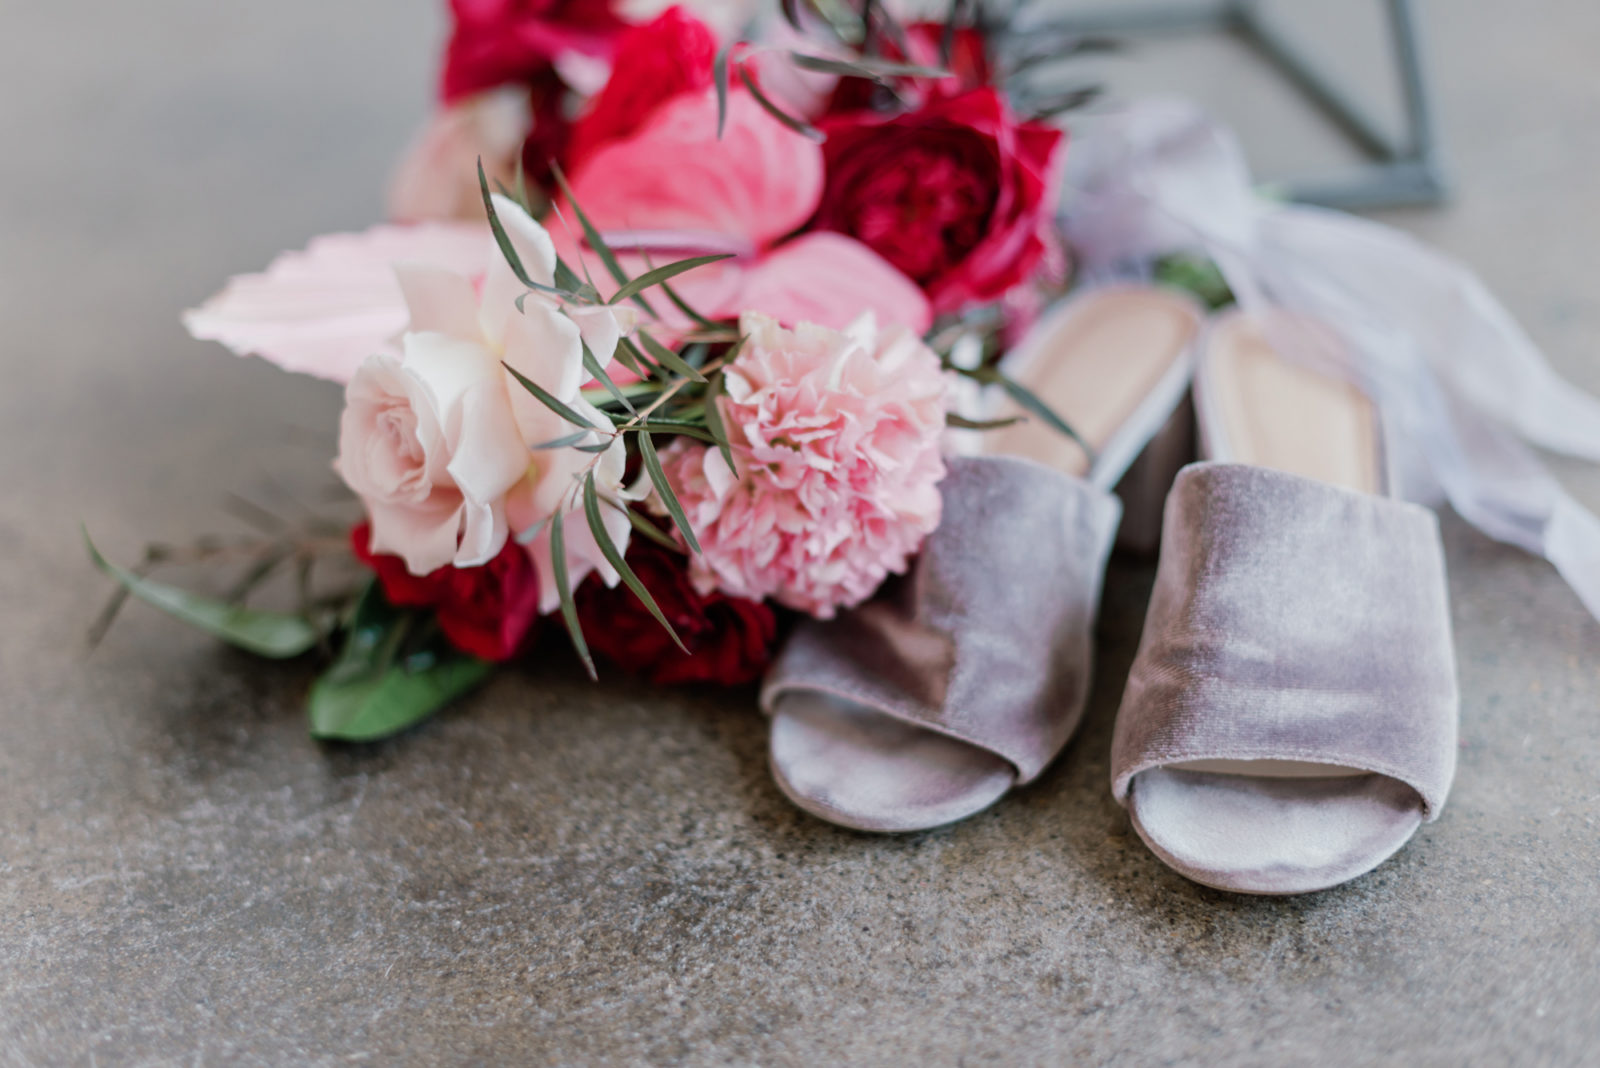 Mauve bridal heels with vibrant pink flowers for this modern microwedding inspiration editorial